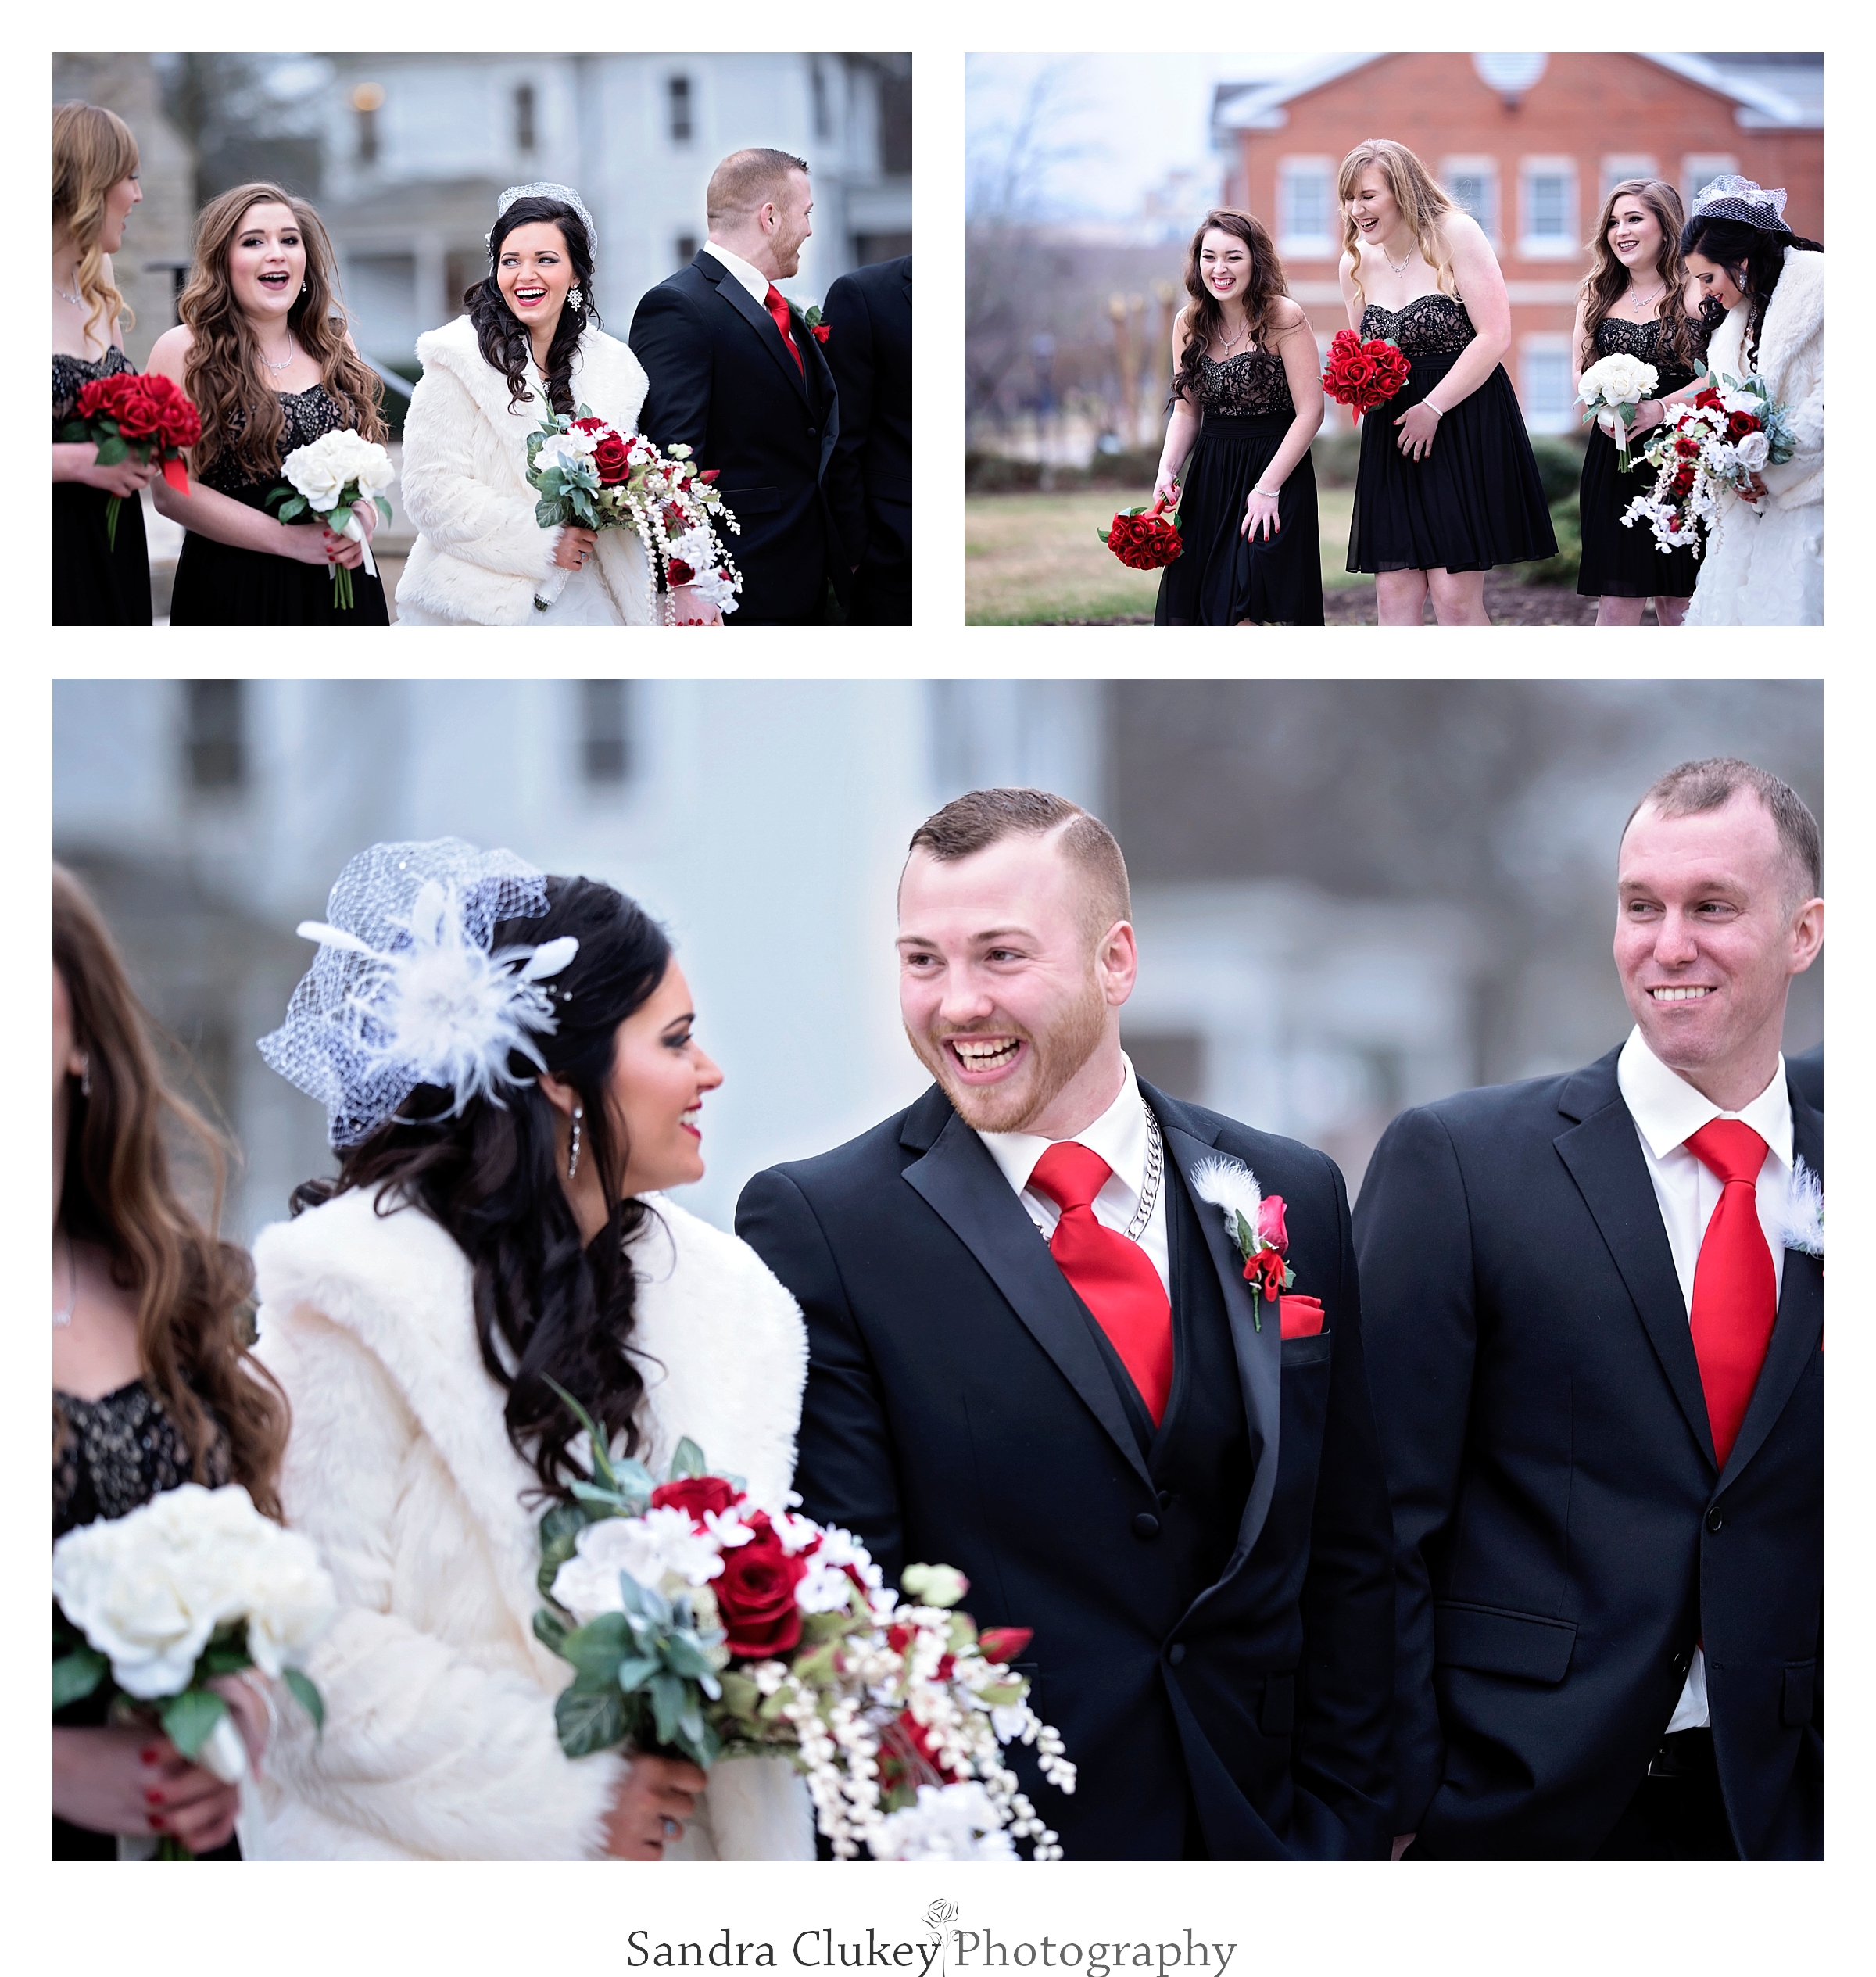 Wedding day laughter ensues at  Lee University chapel, Cleveland TN.